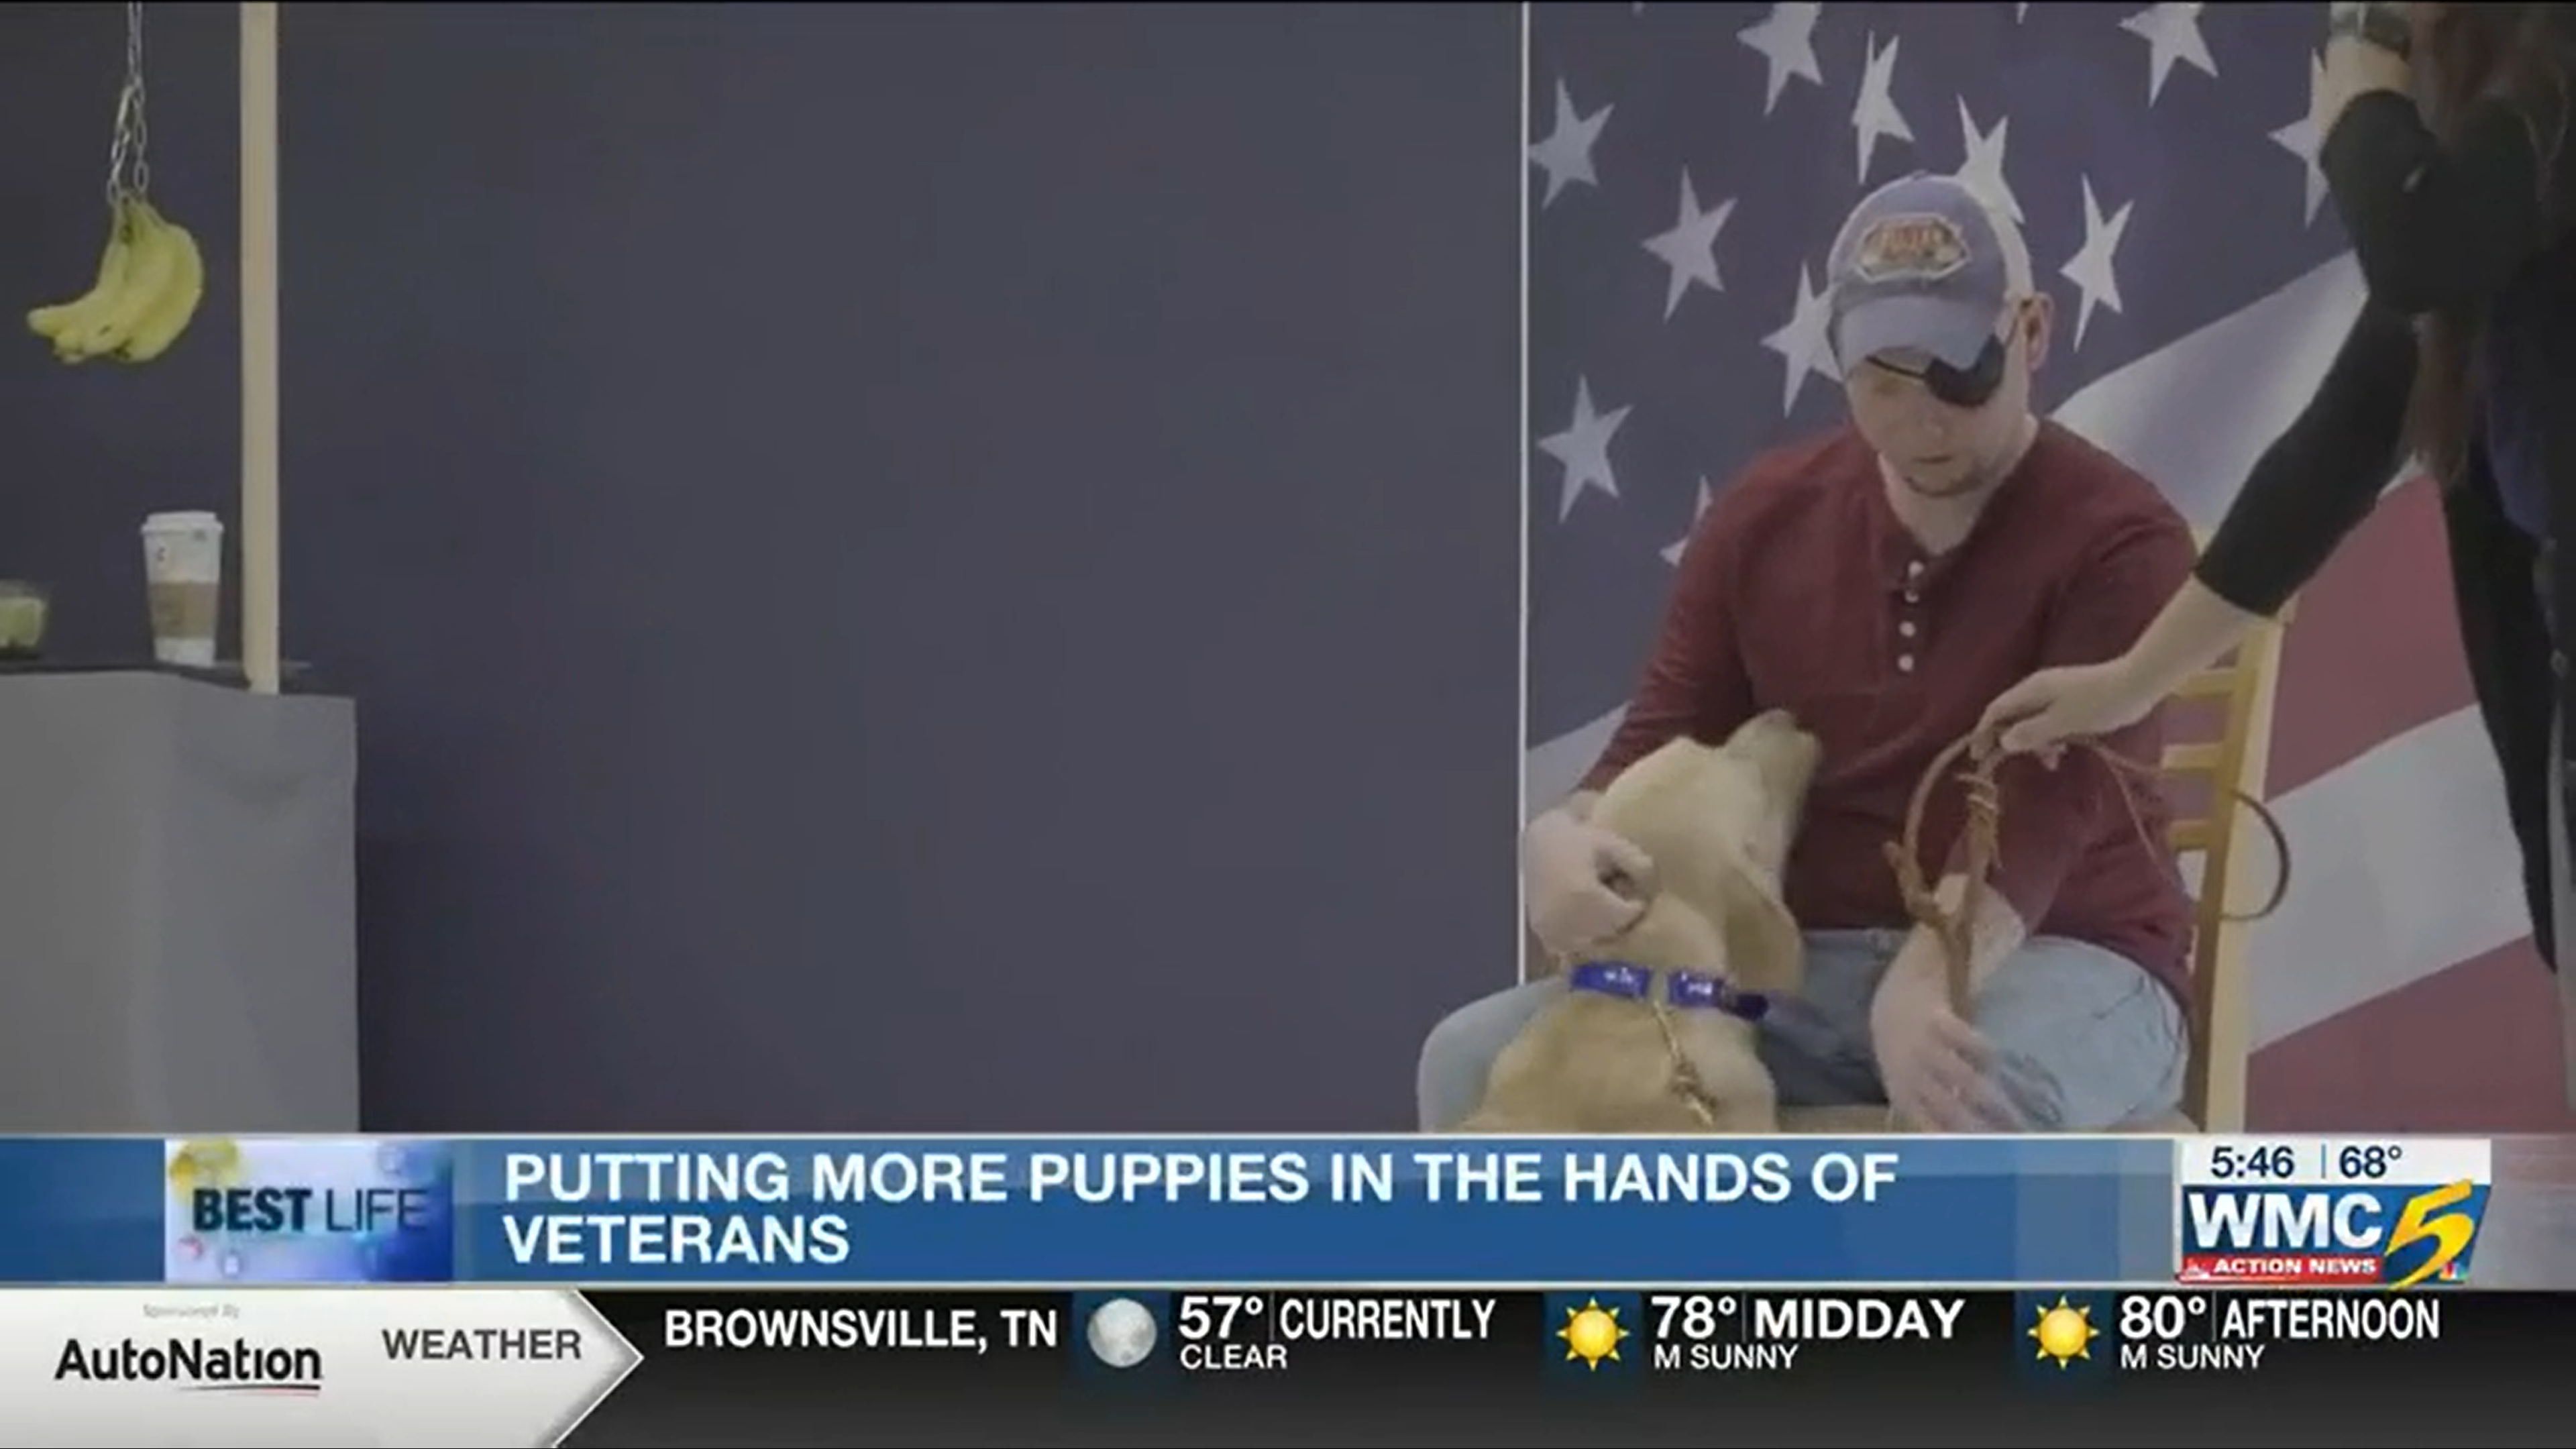 This new puppy-training strategy hopes to increase the veteran service dog graduation rate